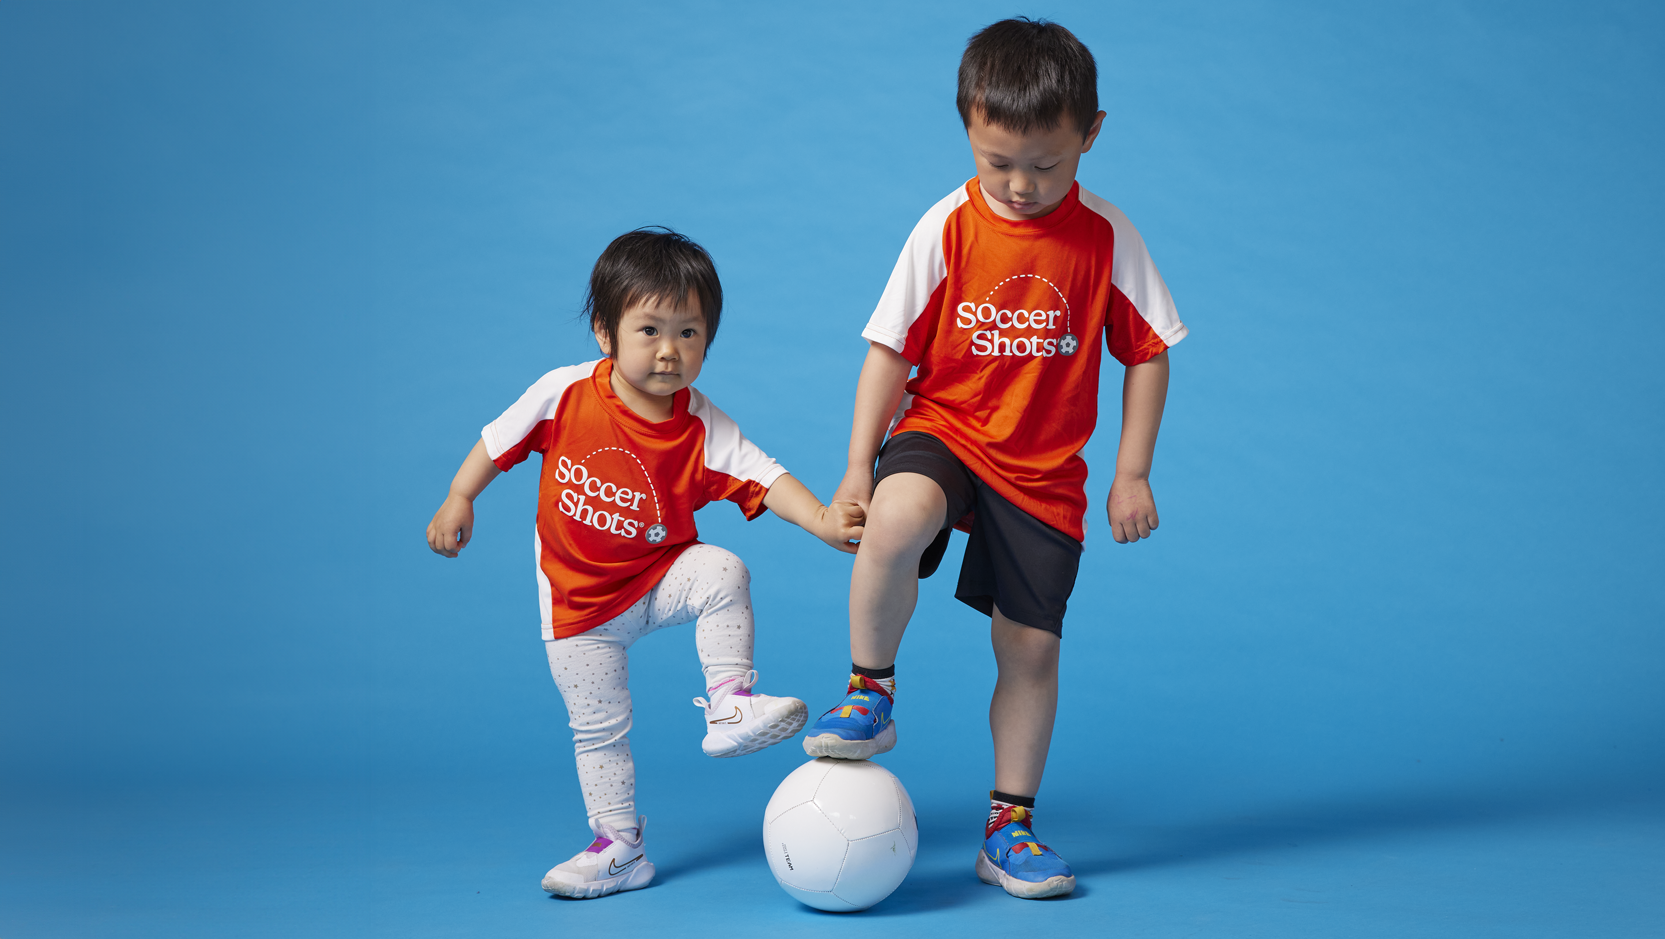 Little boy and girl in Soccer Shots jerseys with a soccer ball.